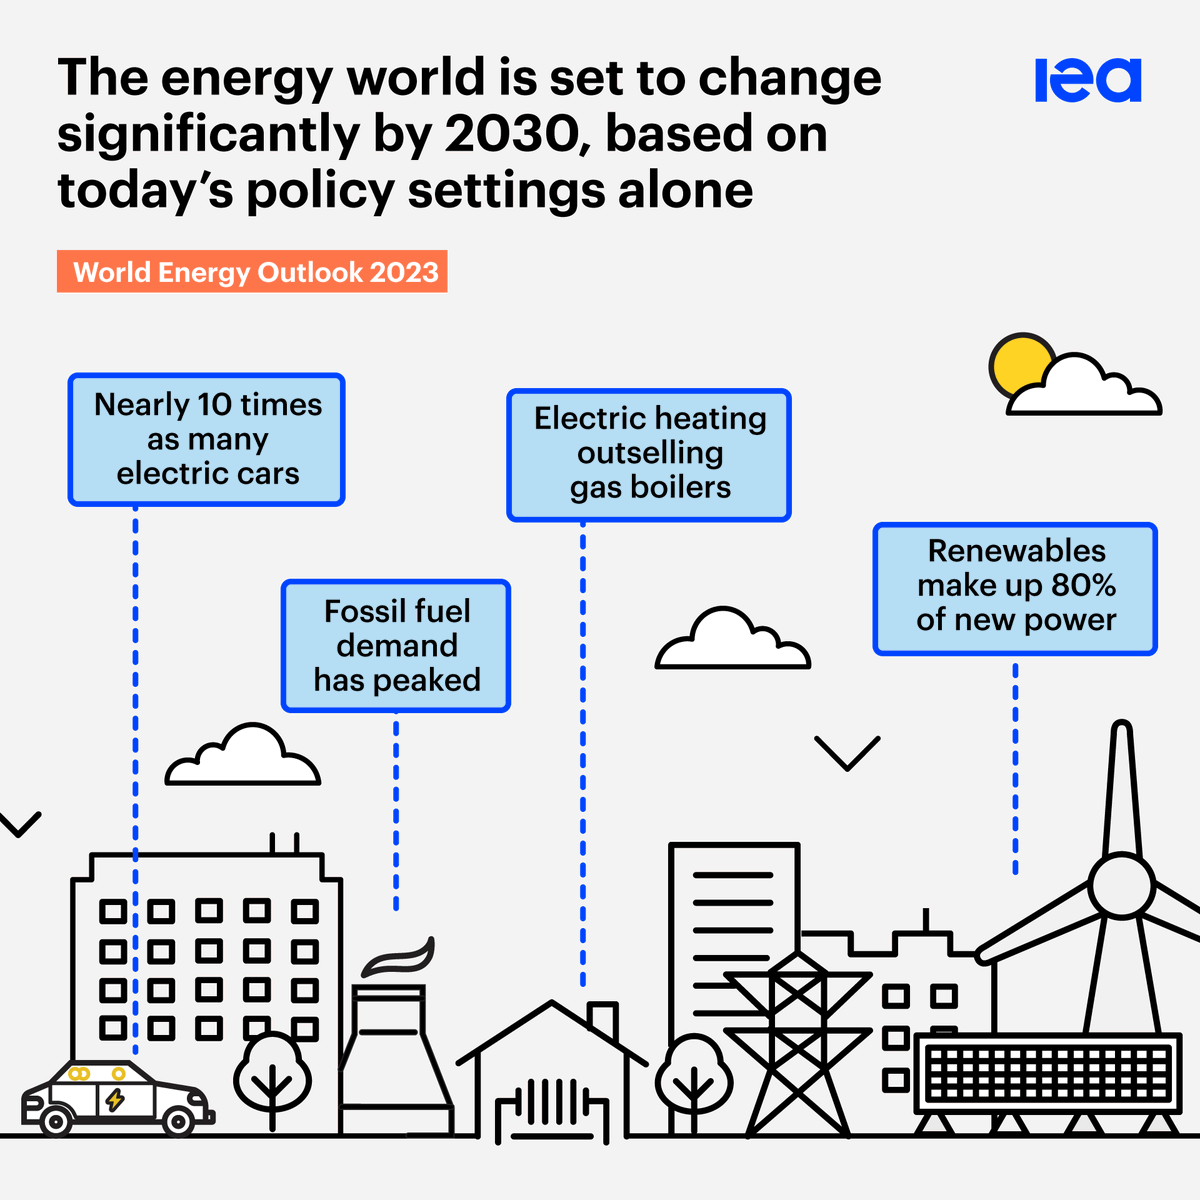 The energy world will look very different by 2030, even under today's policy settings 🚗 Nearly 10 times as many electric cars ☀️ Renewables = 80% of new power ⚡️ Electric heating outselling fossil fuel boilers 🏭 Fossil fuel demand has peaked More ➡️ iea.li/49aZXJC